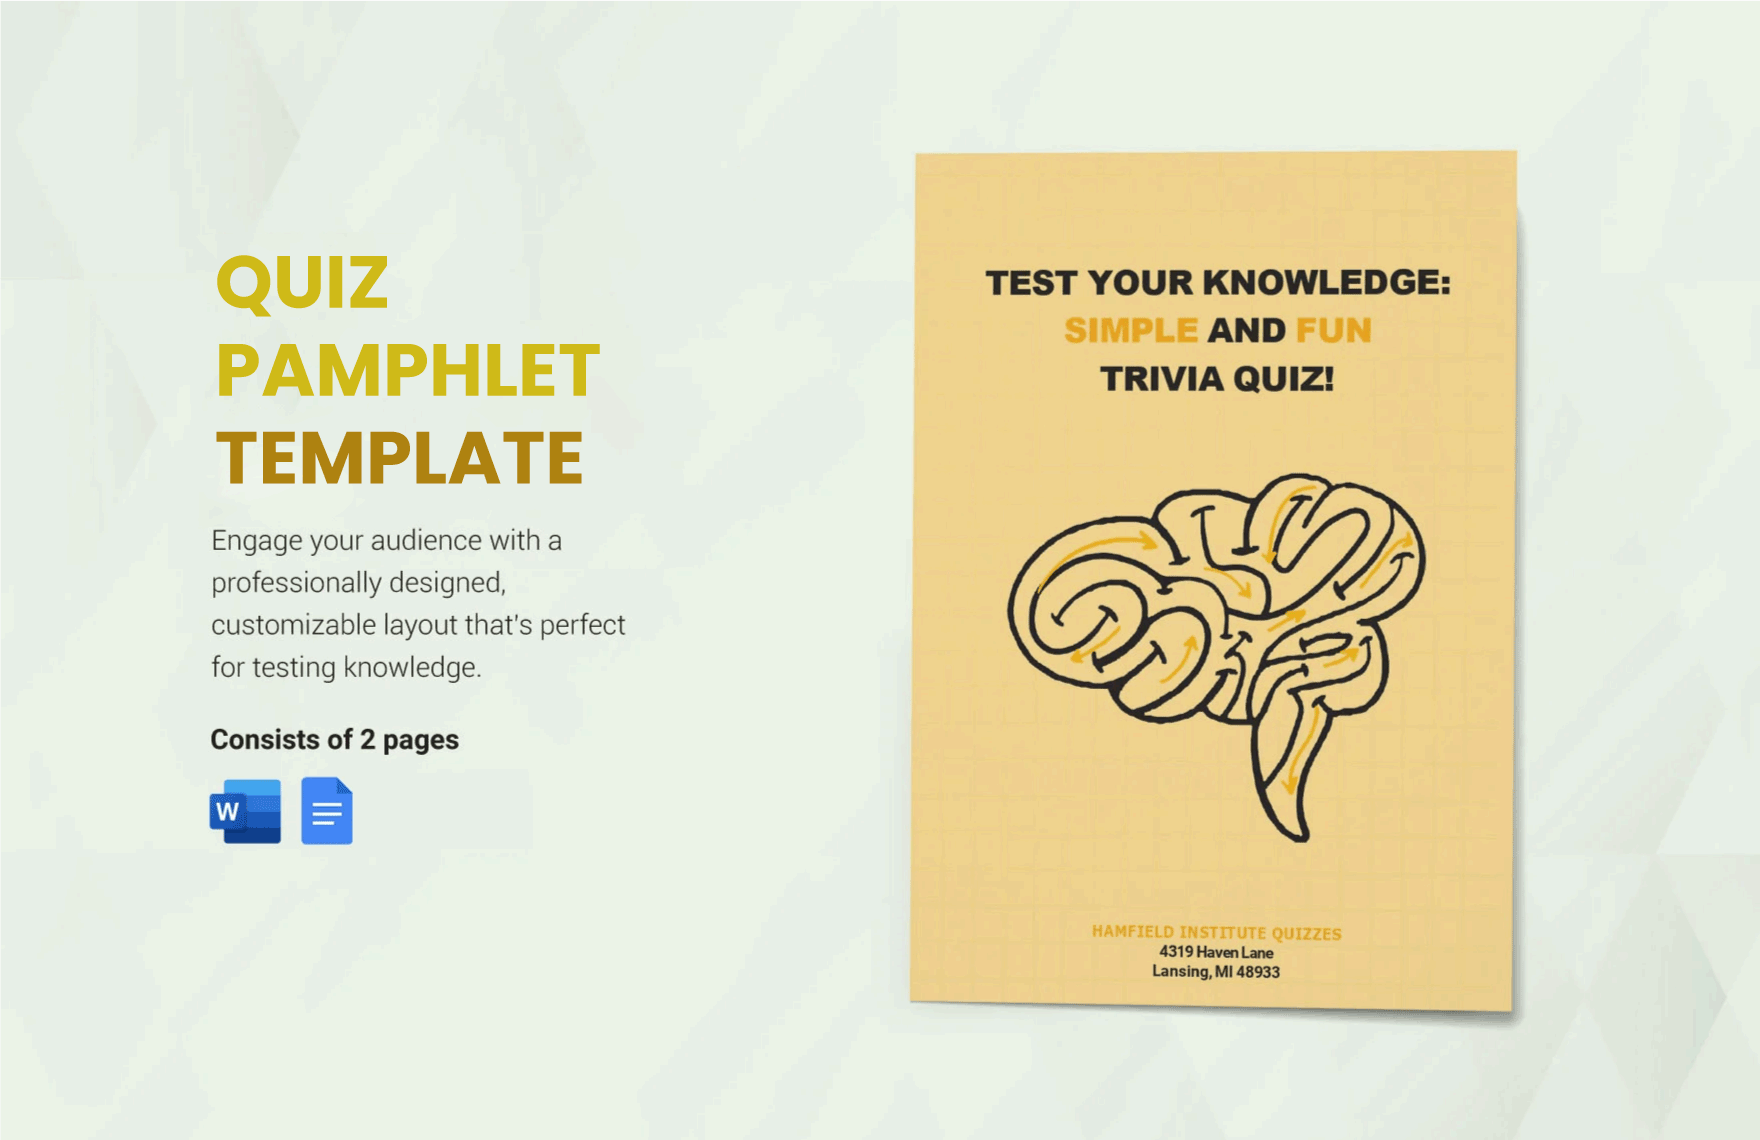 Quiz Pamphlet Template in Word, Google Docs